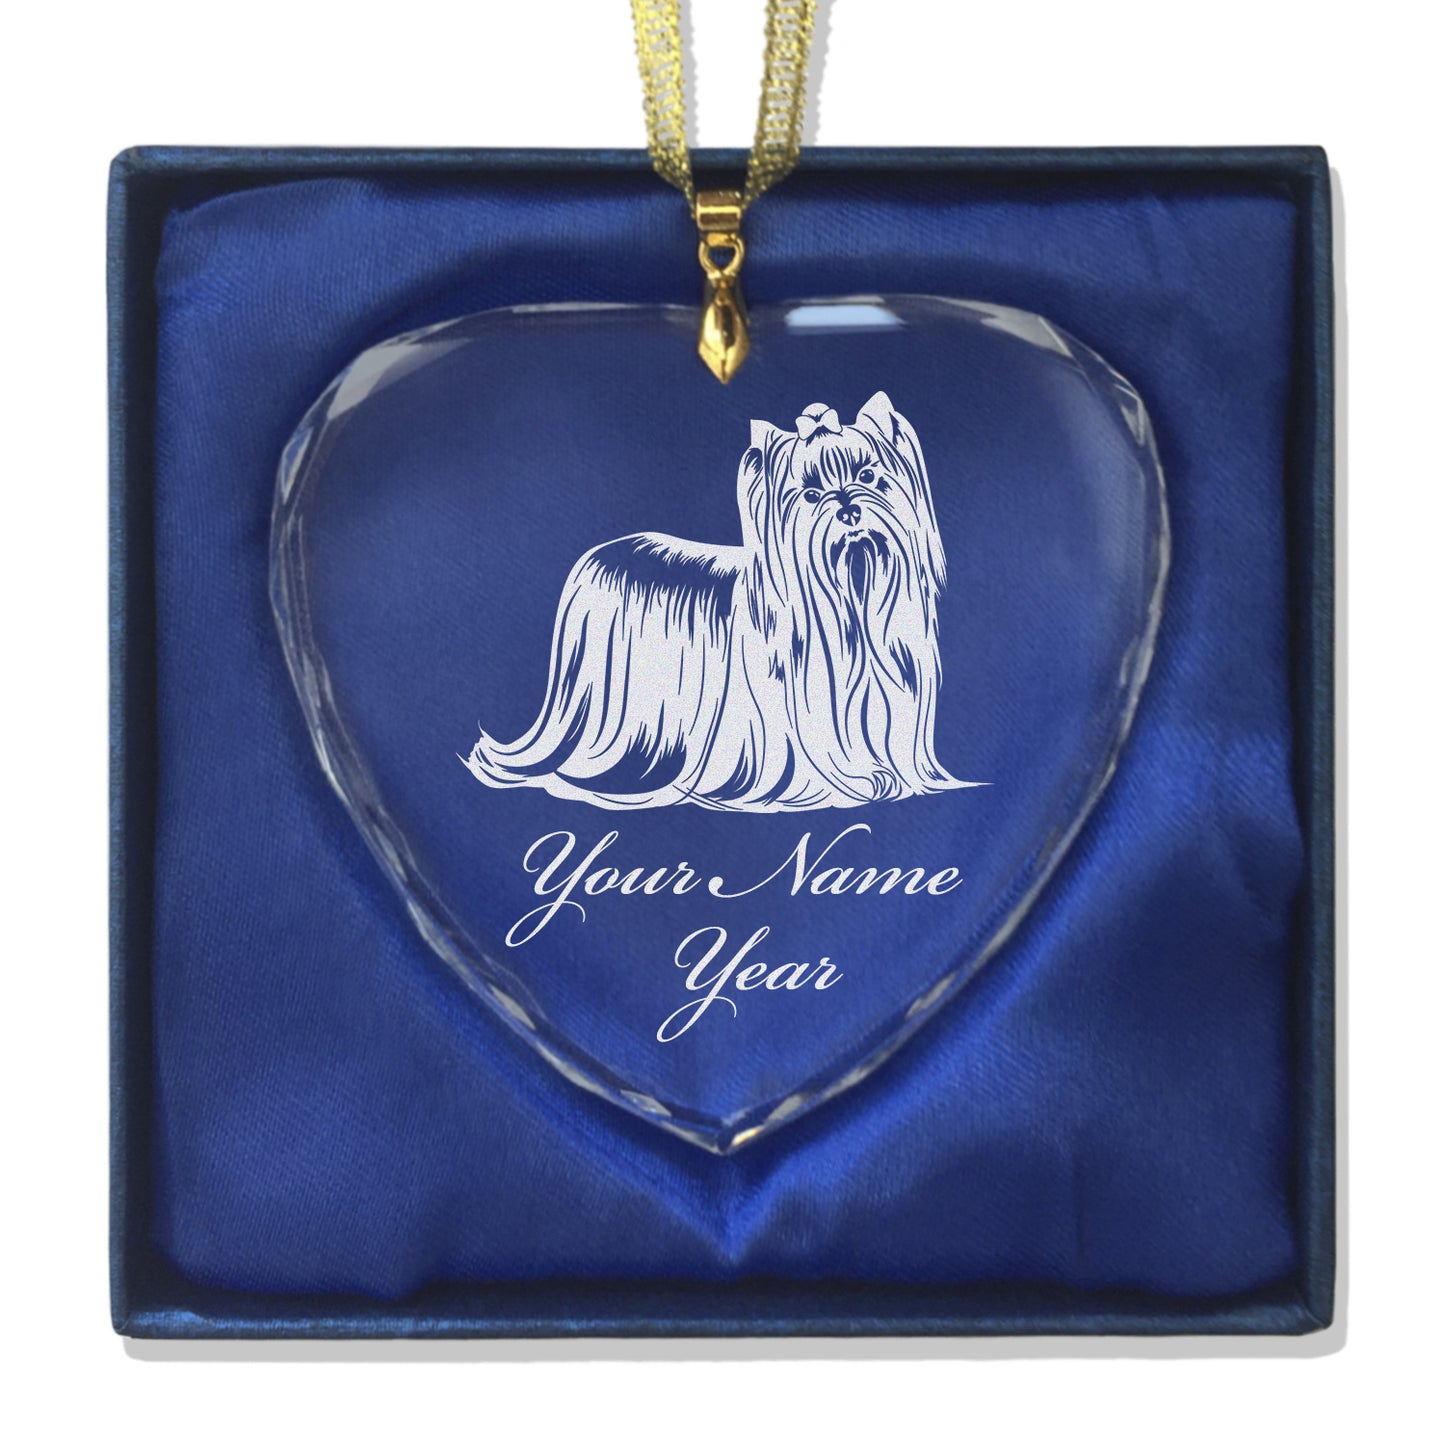 LaserGram Christmas Ornament, Yorkshire Terrier Dog, Personalized Engraving Included (Heart Shape)